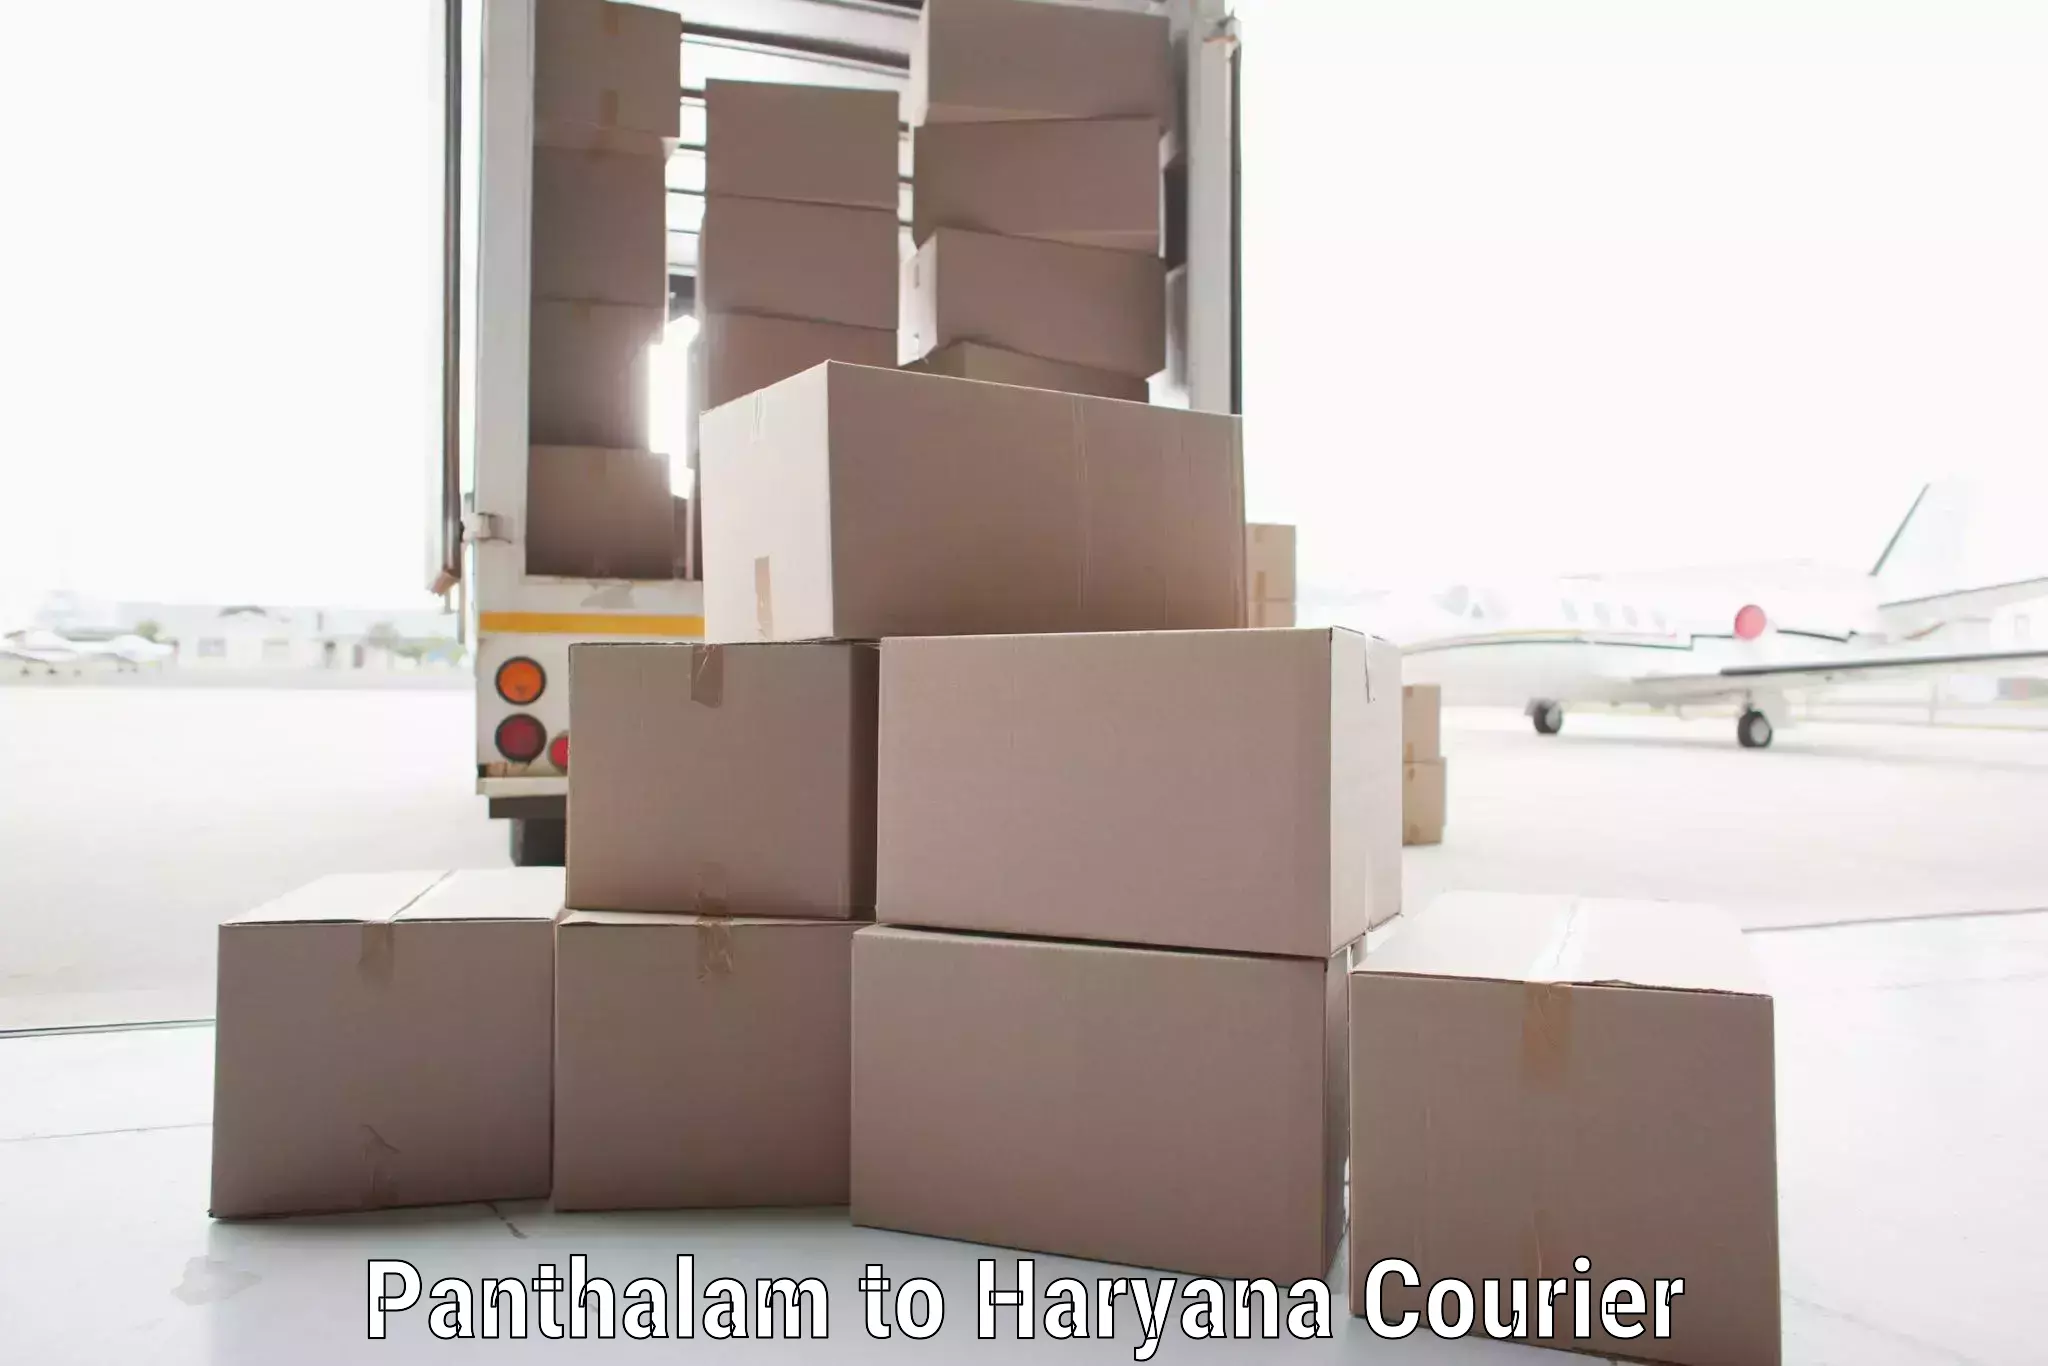 Postal and courier services in Panthalam to Odhan